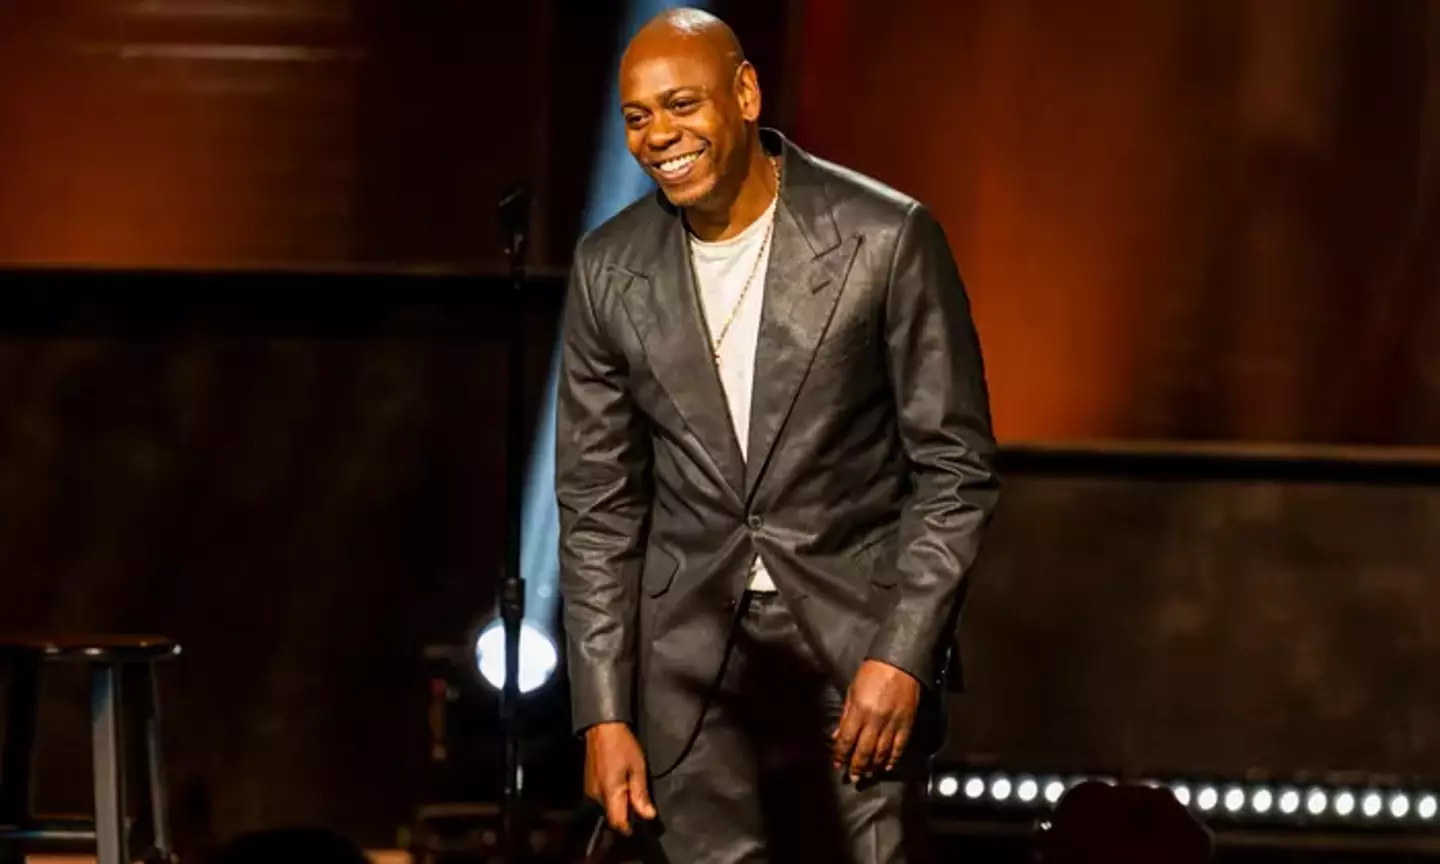 Dave Chappelle won a Grammy recently for 'The Closer'.